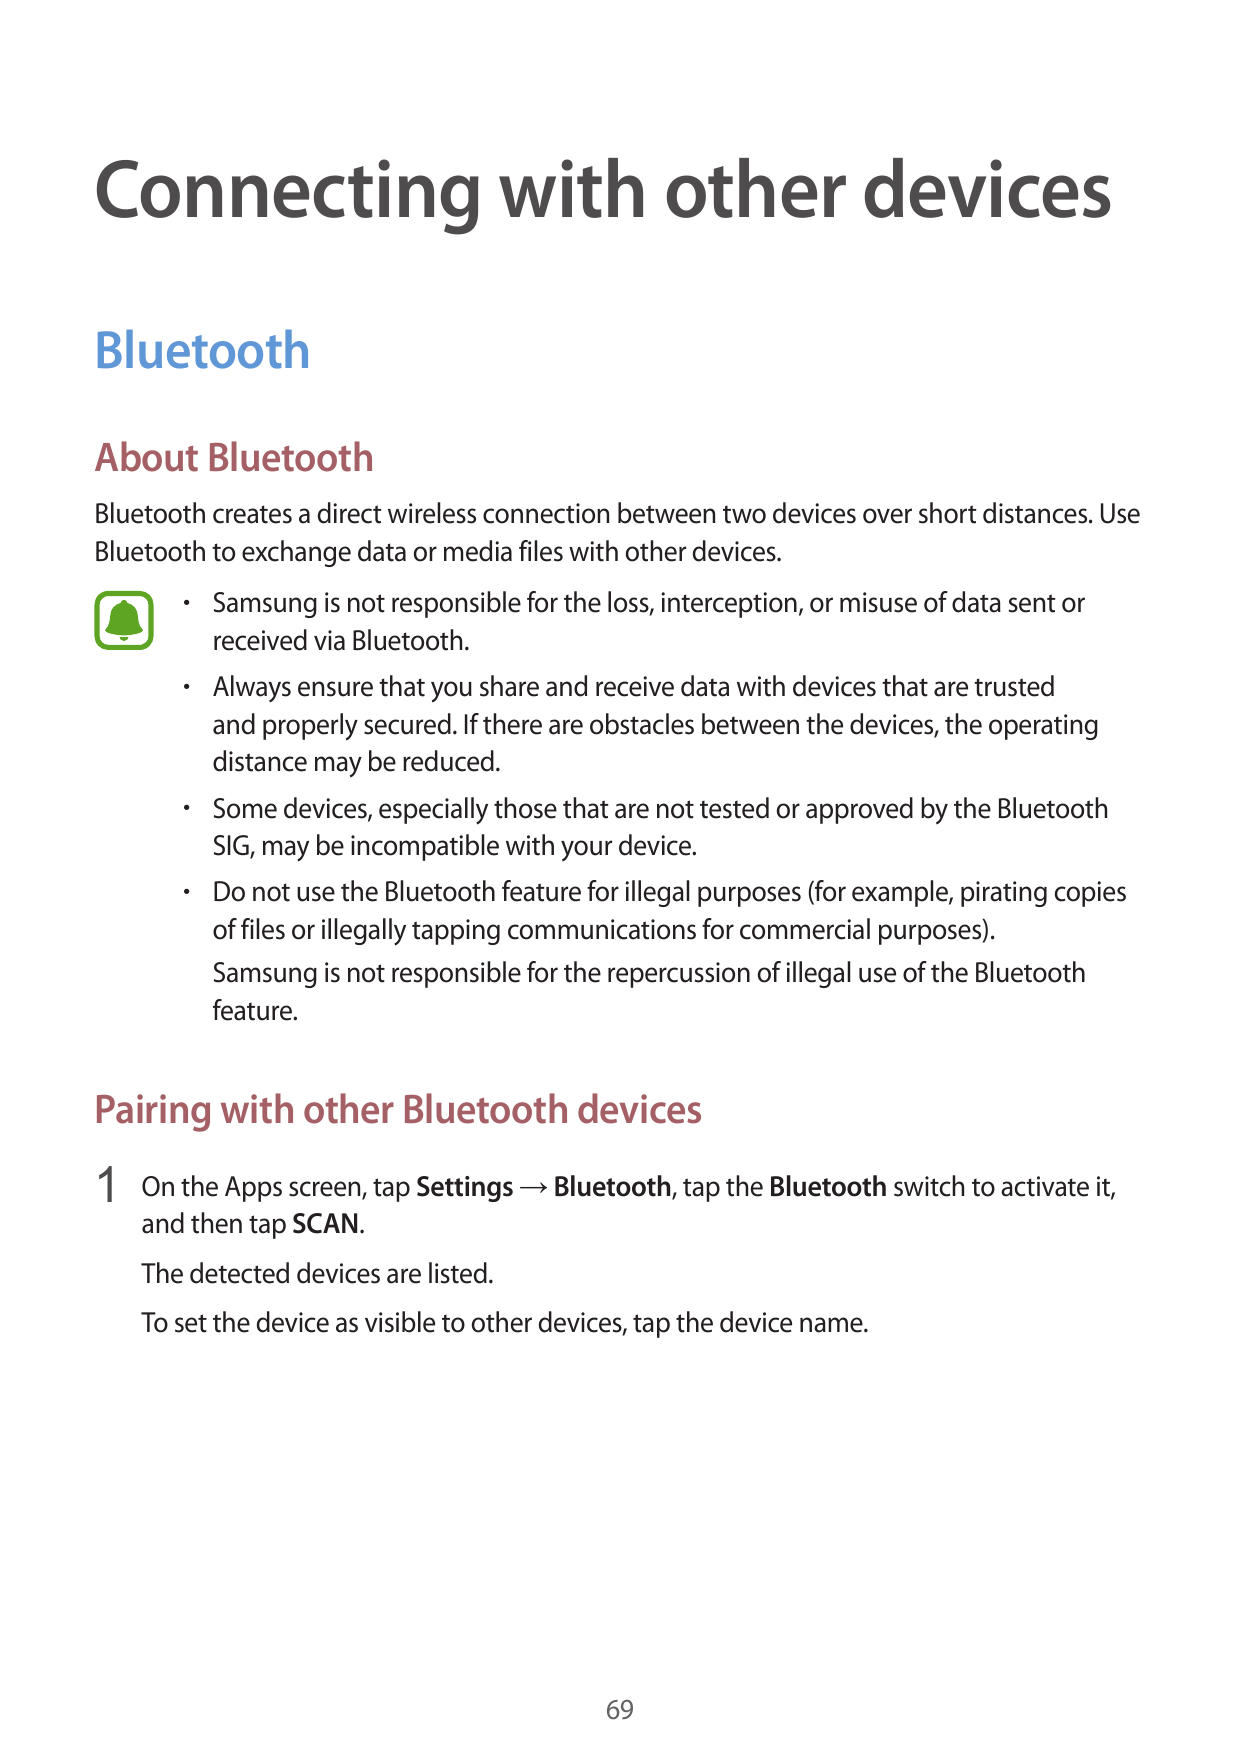 Connecting with other devicesBluetoothAbout BluetoothBluetooth creates a direct wireless connection between two devices over sho